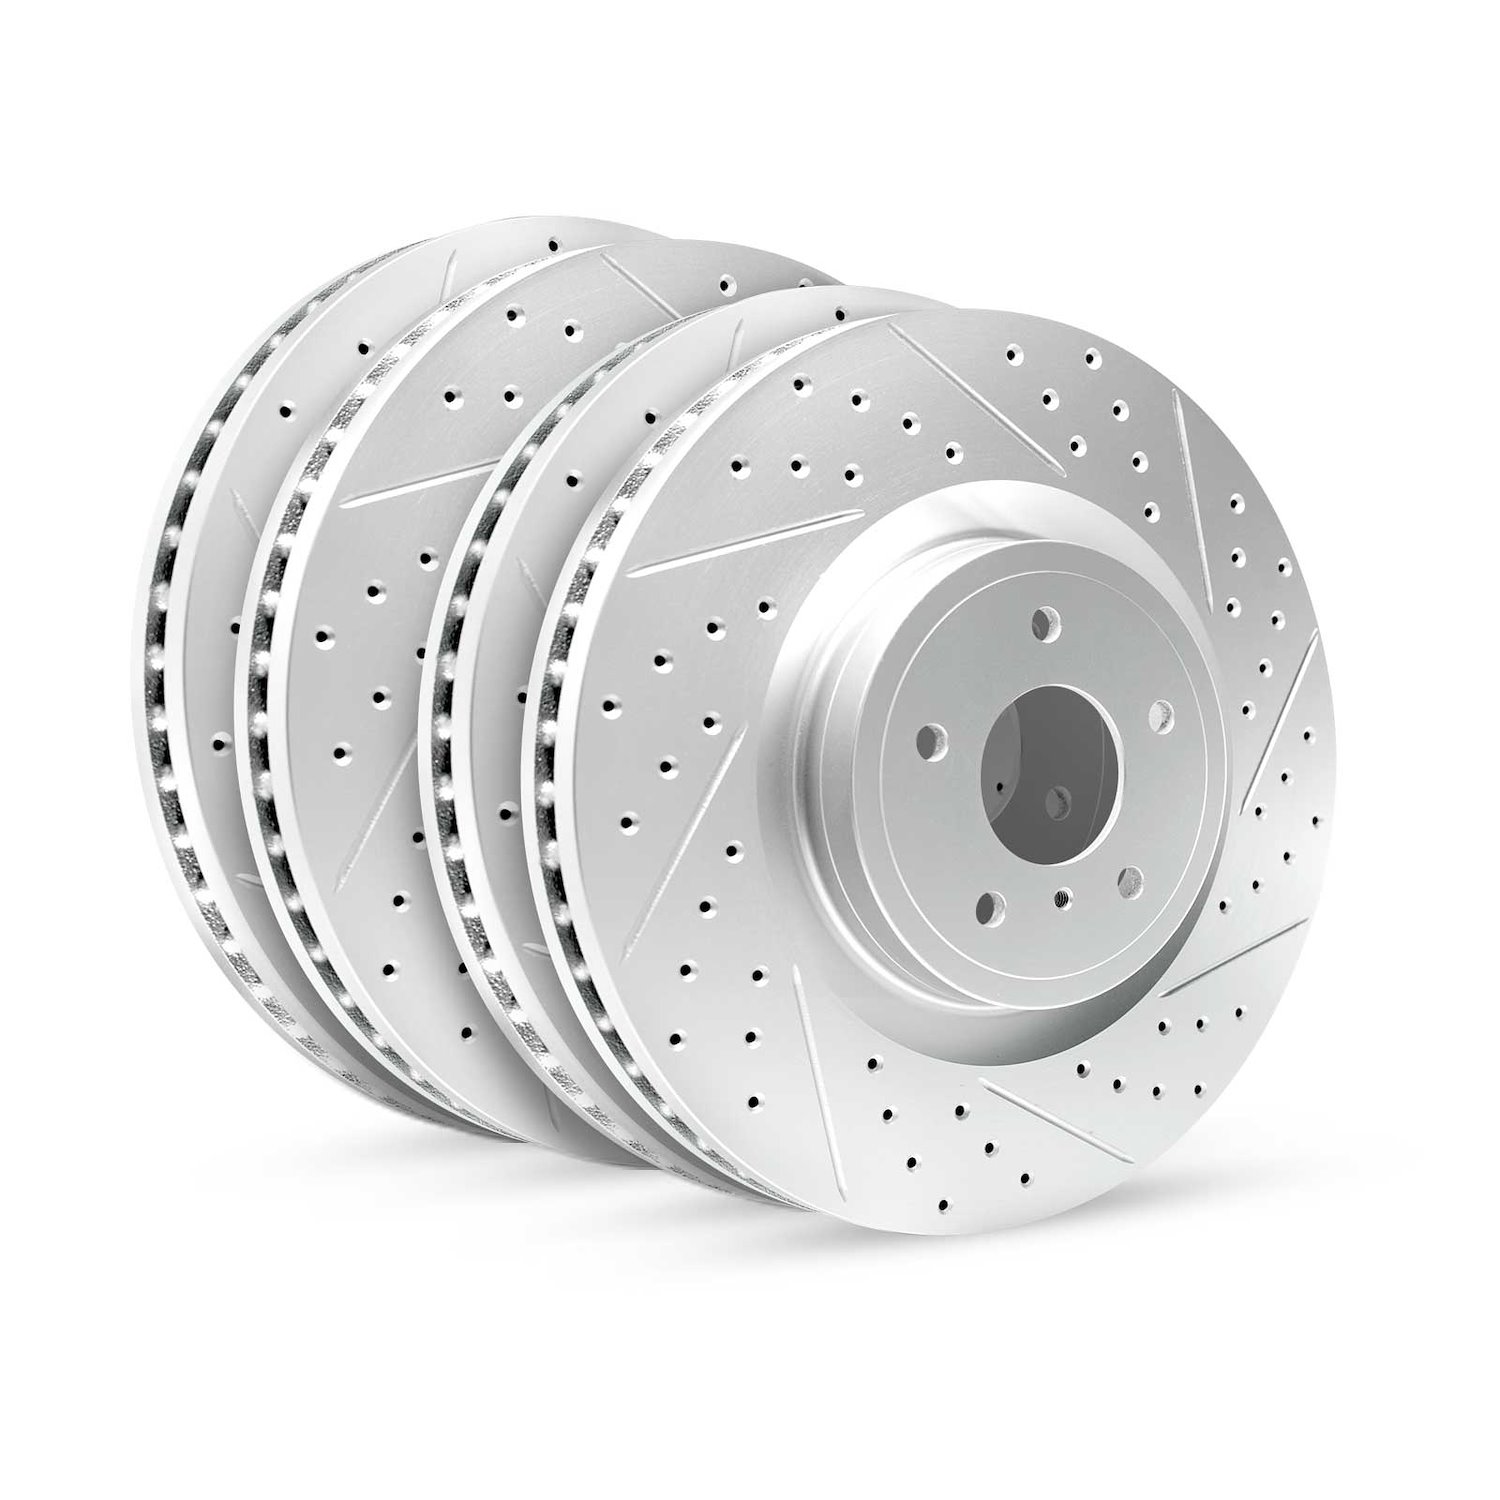 GEO-Carbon Drilled/Slotted Rotors, 2013-2018 BMW, Position: Front/Rear